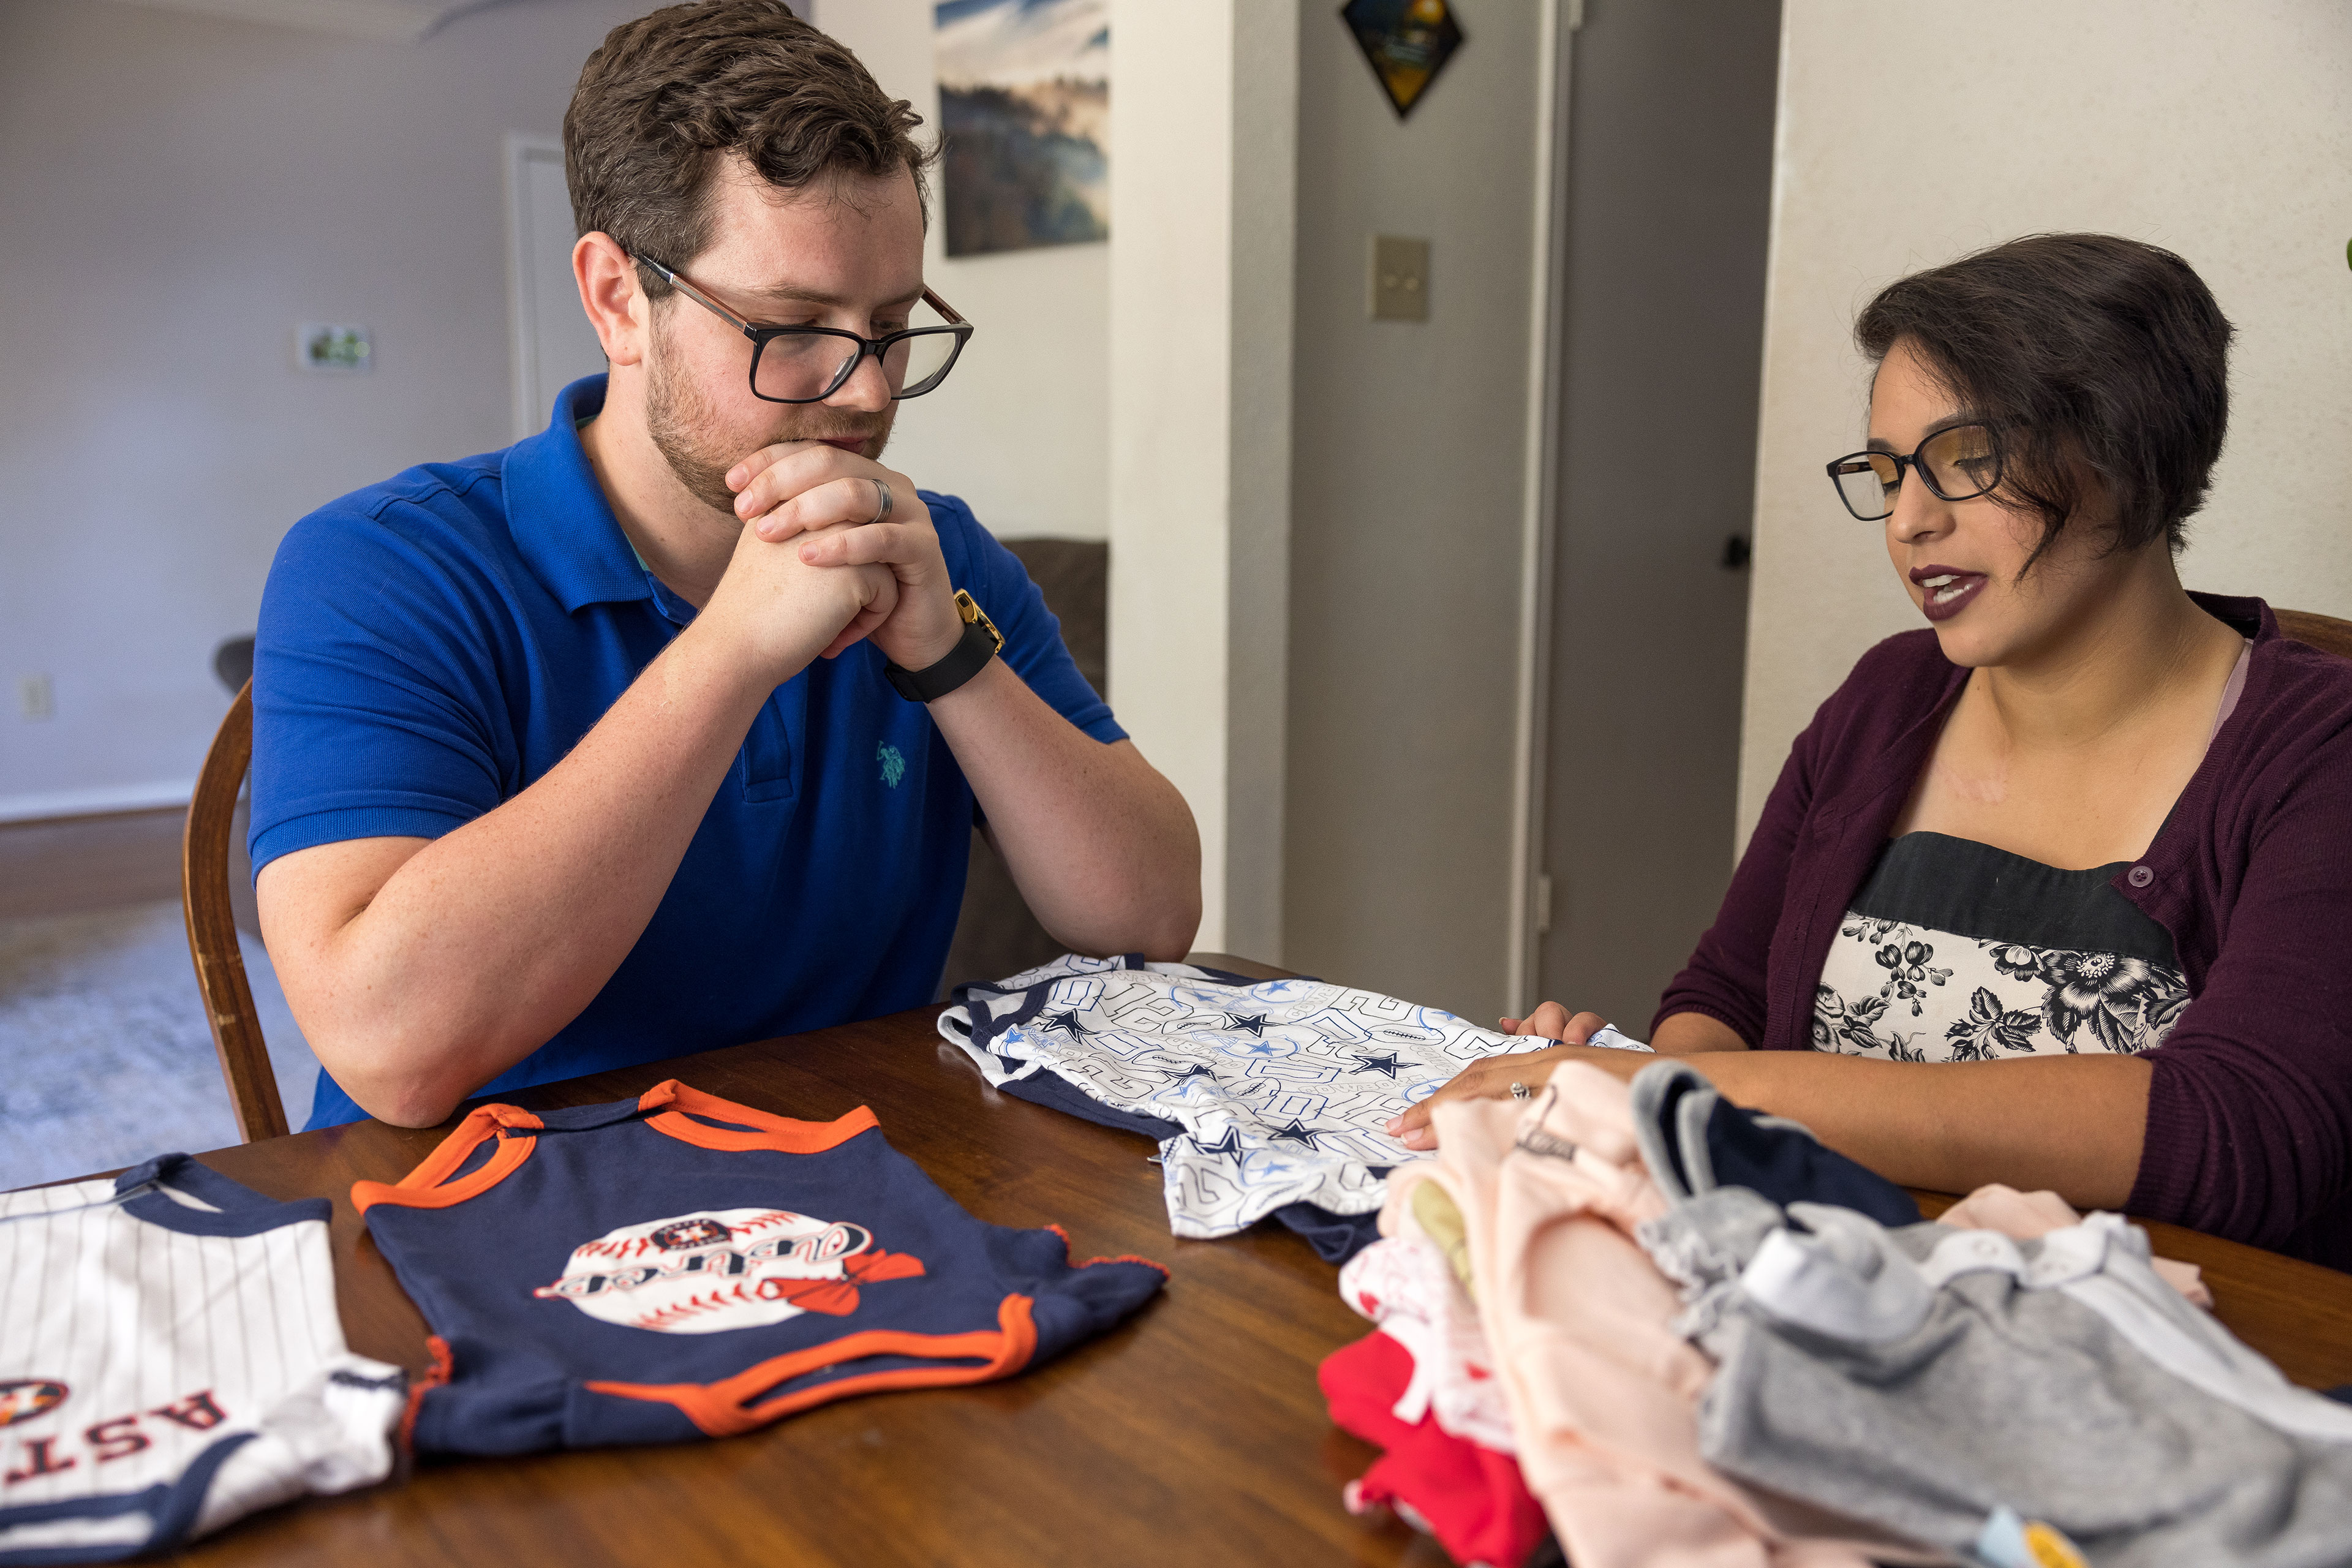 A man and a woman sit at a table where baby onesies are piled.